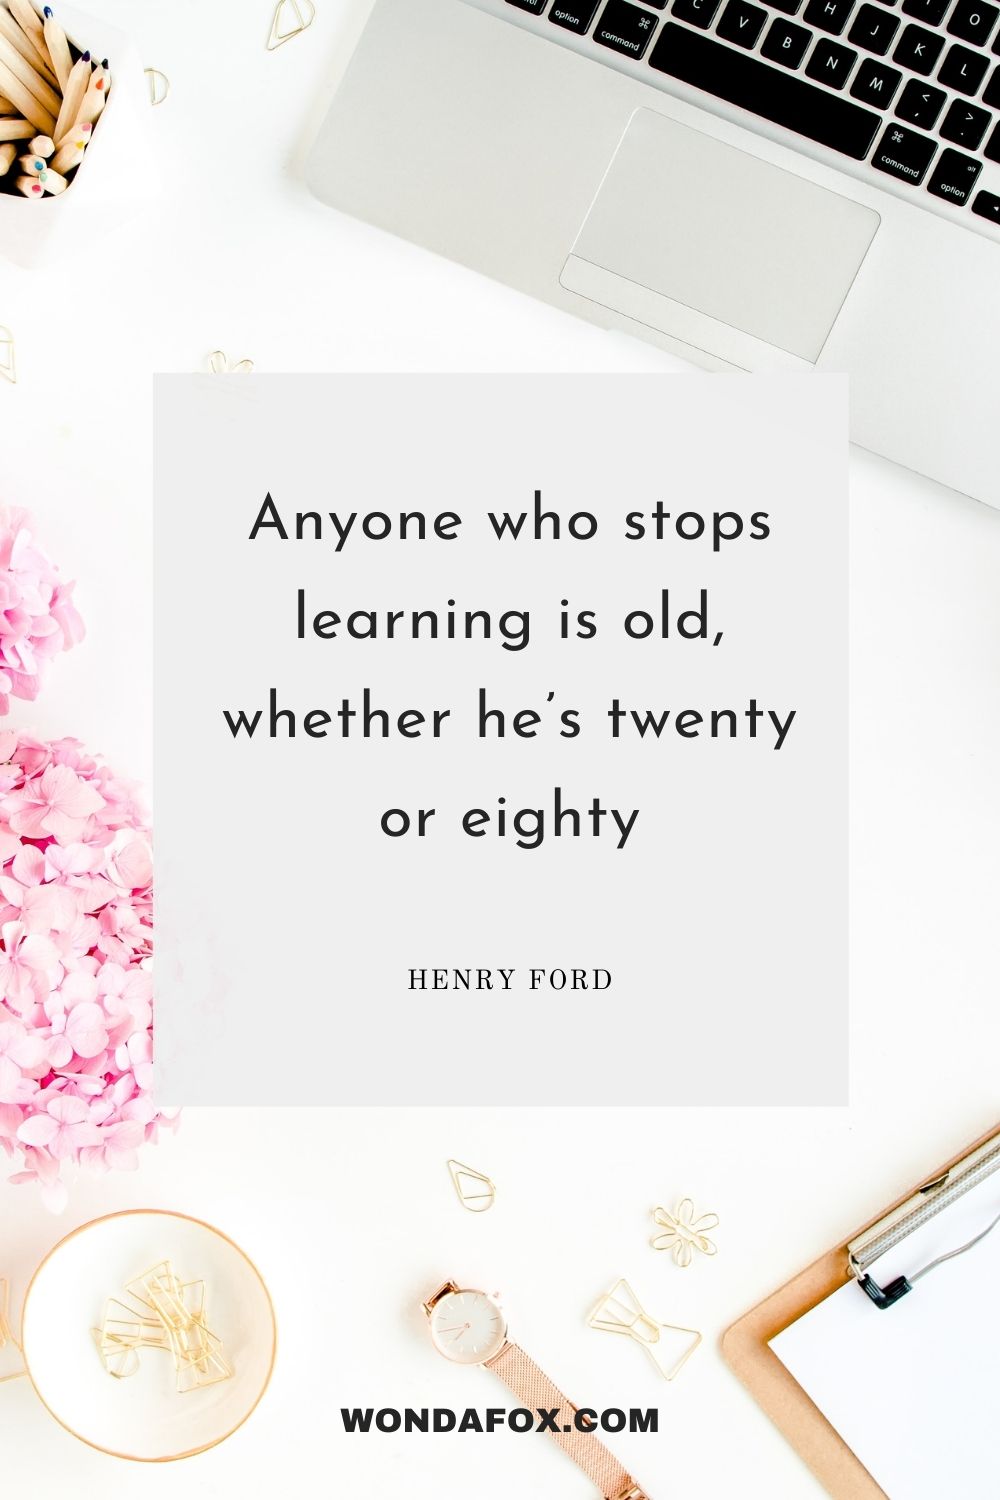 Anyone who stops learning is old, whether he’s twenty or eighty